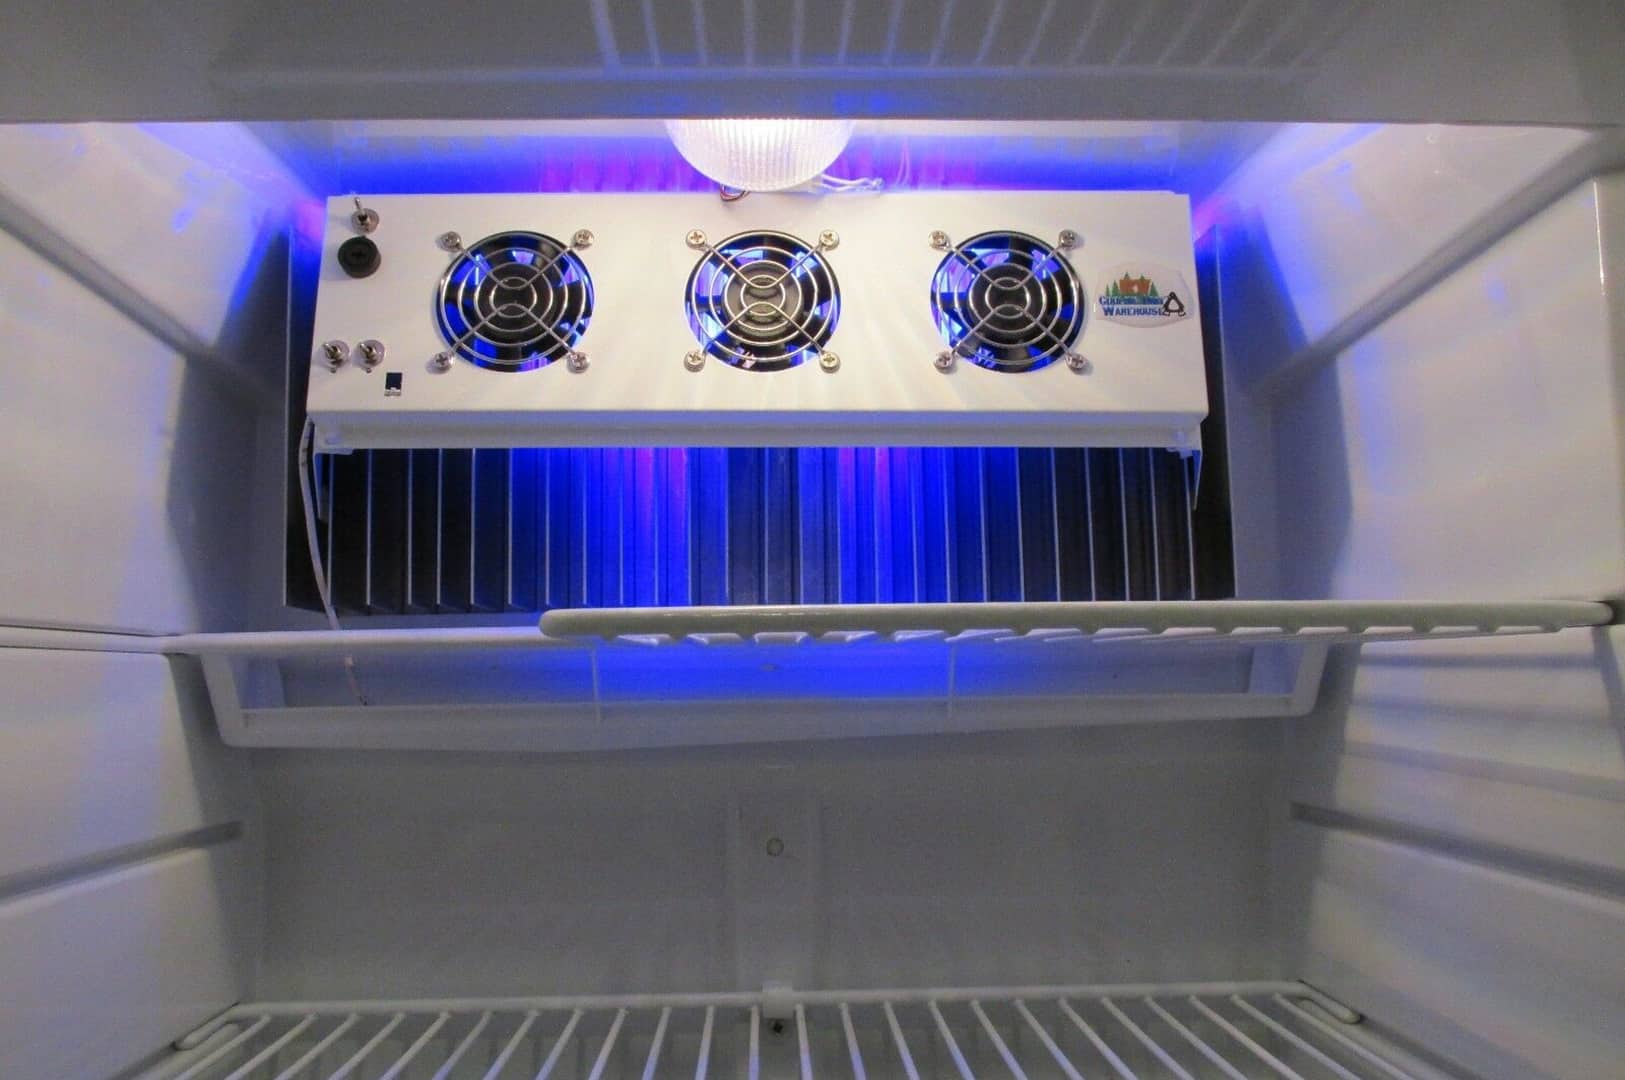 The 15 Best Rv Refrigerator Fans For The Money In 2021